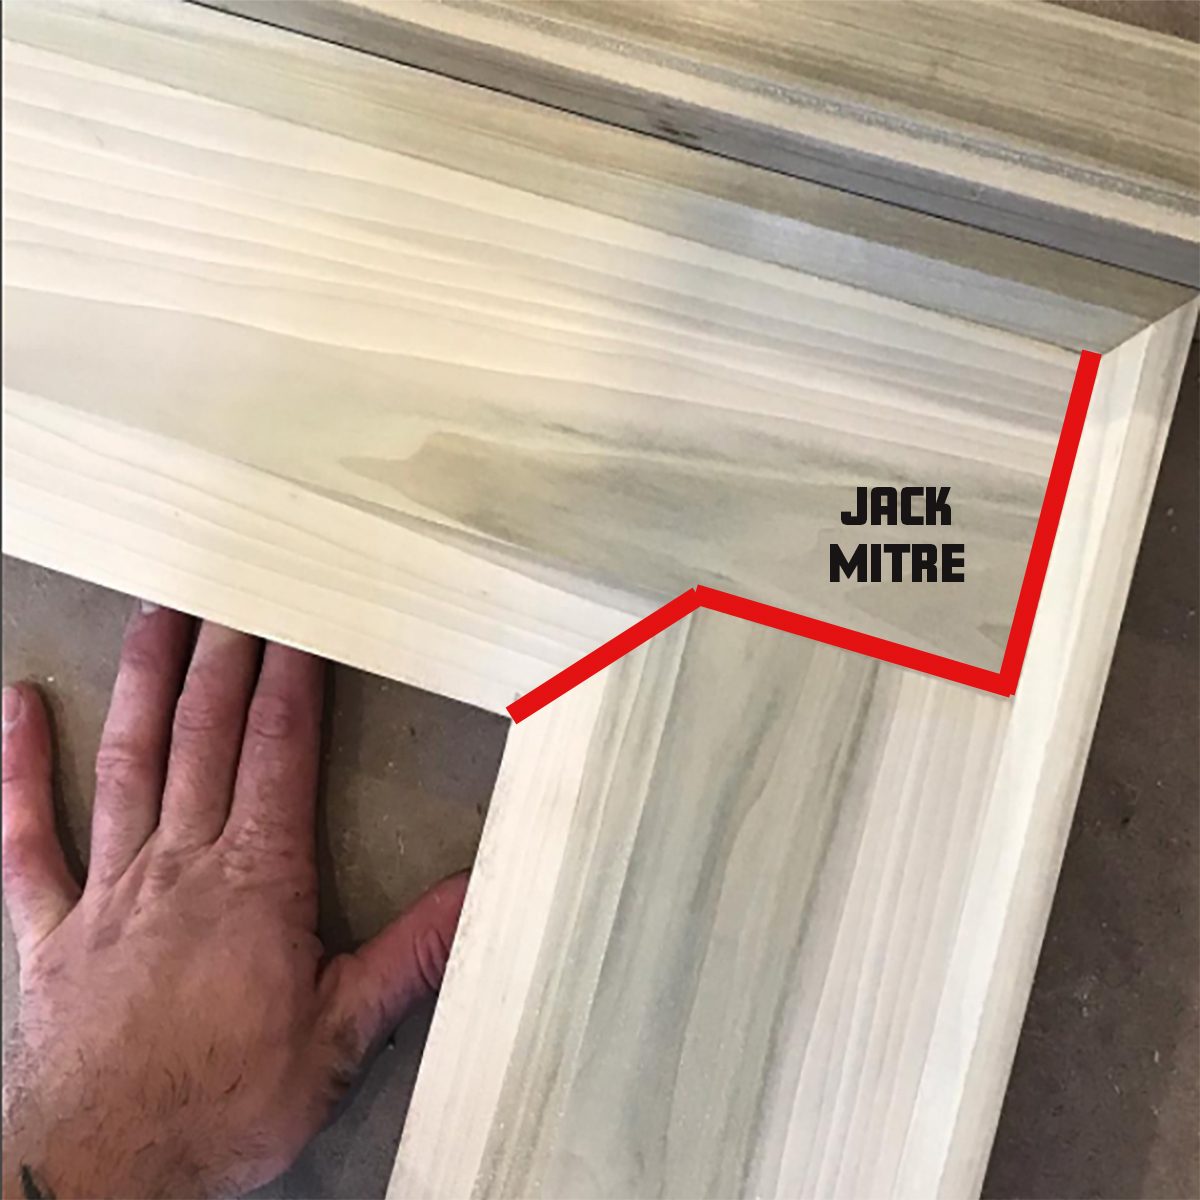 Consider using a jack mitre